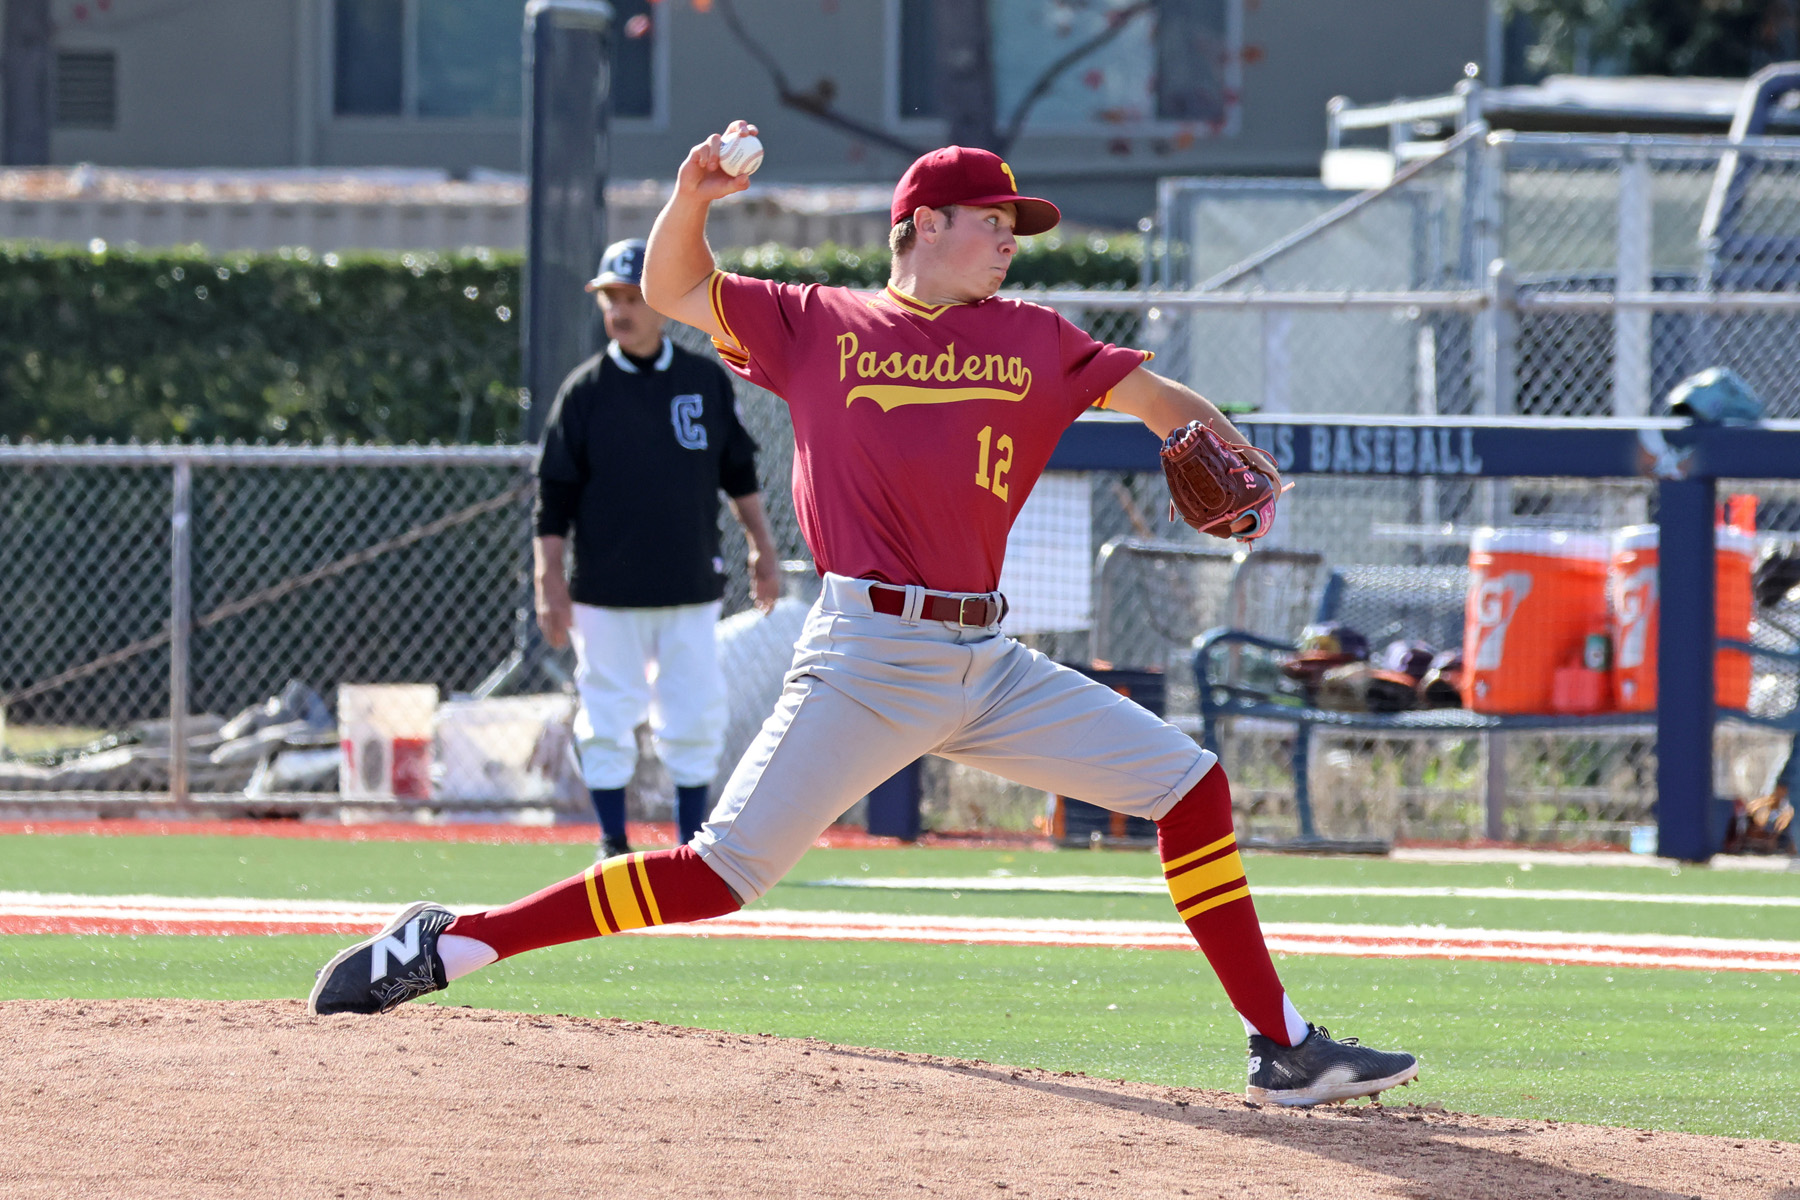 Connor Campbell delivers a pitch in PCC's win at Citrus College on Saturday (photo by Richard Quinton).